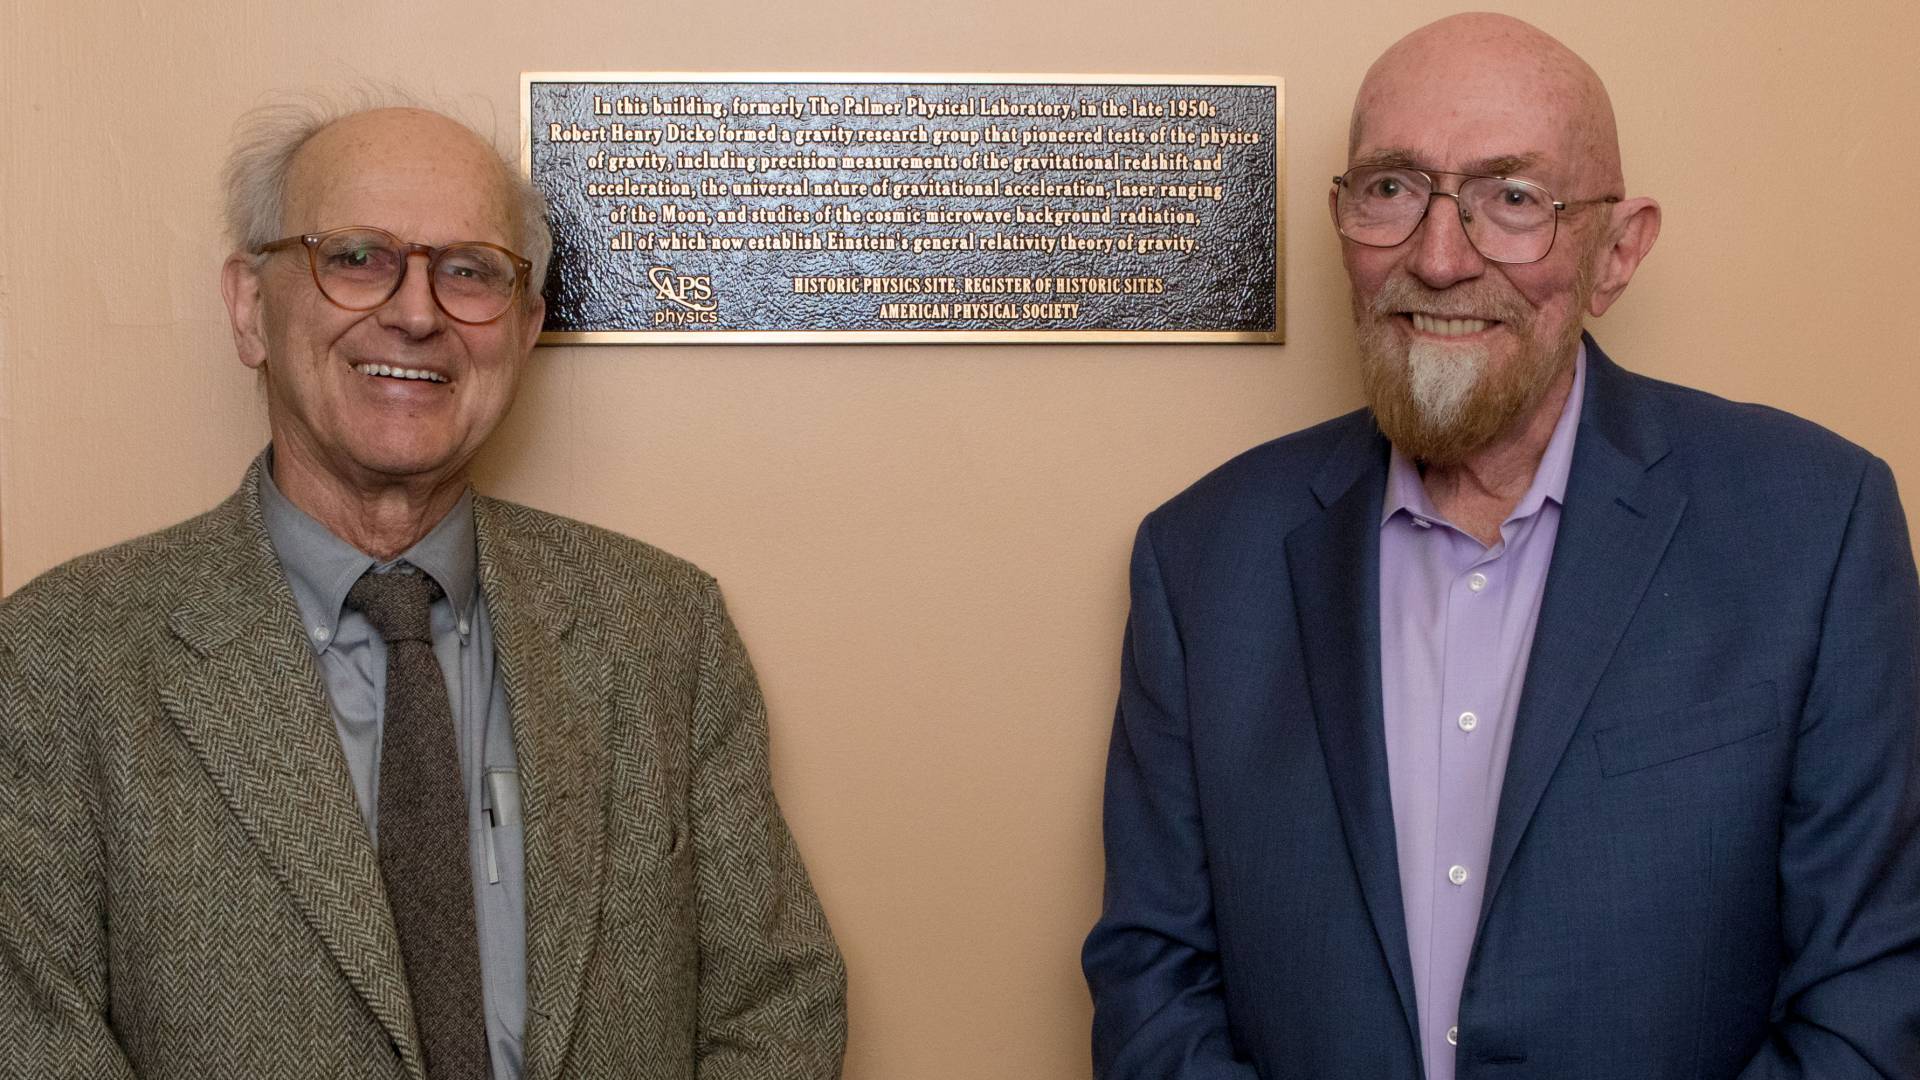 Rainer Weiss and Kip Thorne stand next to a plaque commemorating physics work of Robert “Bob” Dicke